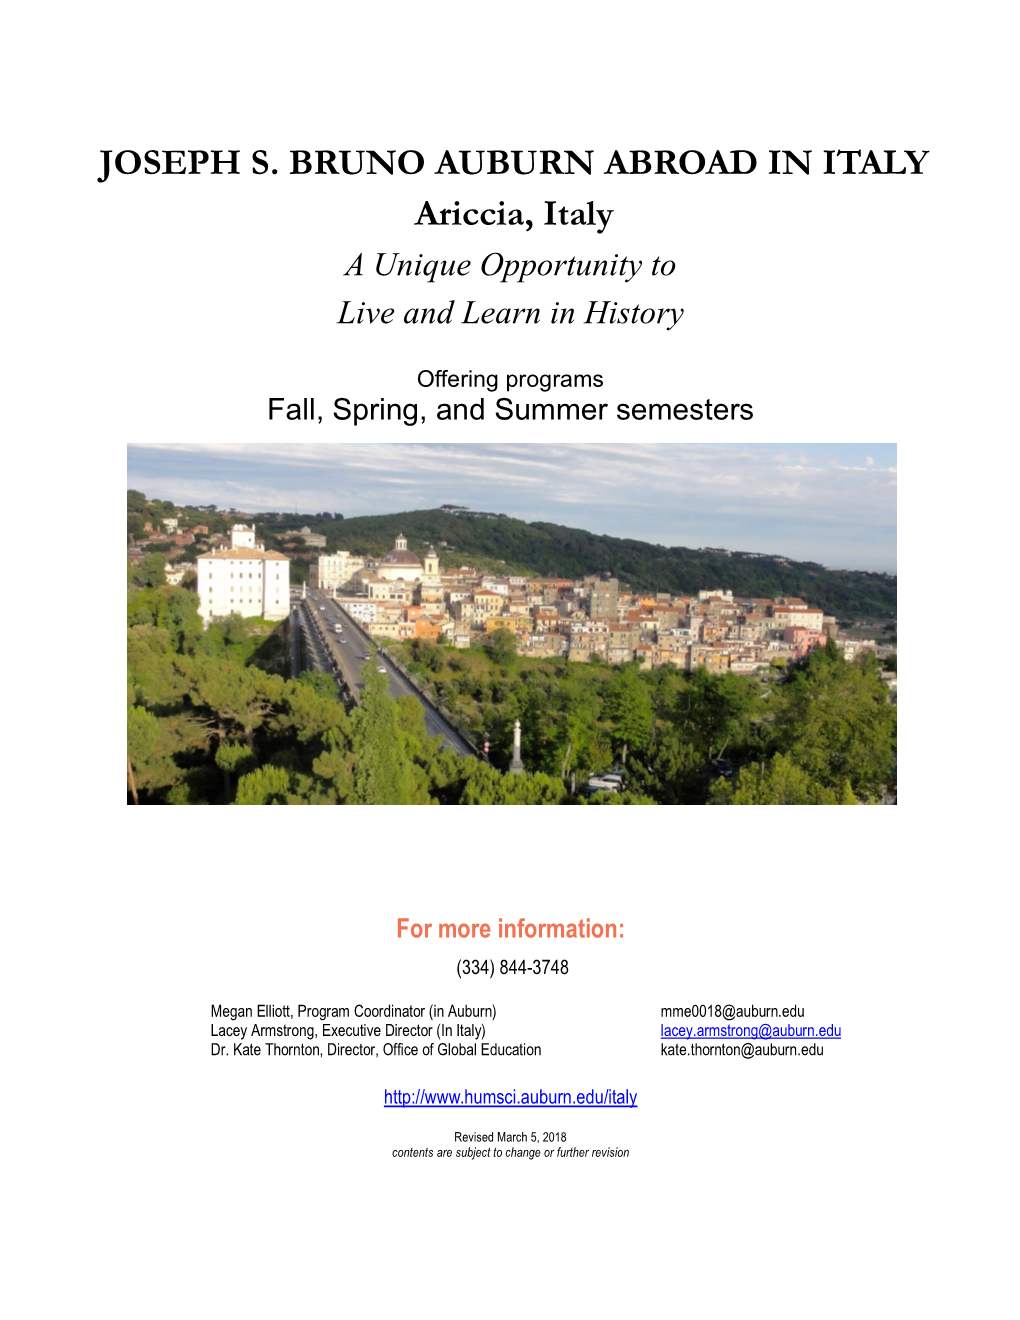 JOSEPH S. BRUNO AUBURN ABROAD in ITALY a Unique Opportunity to Live and Learn in History